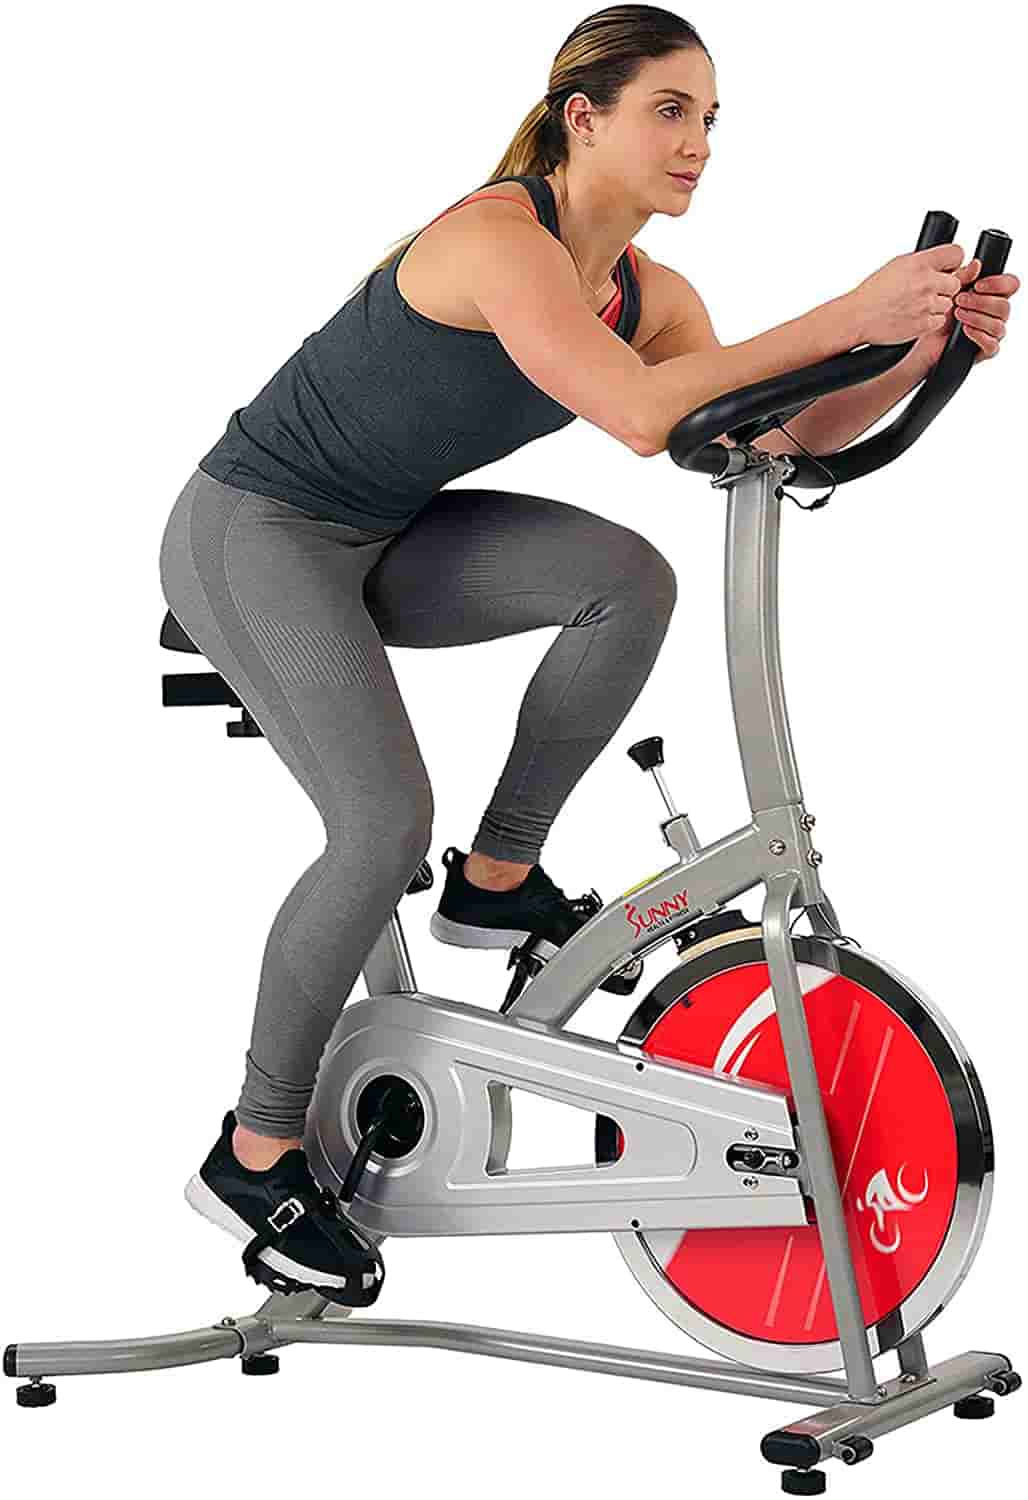 Sunny Health & Fitness Indoor Exercise Stationary Bike